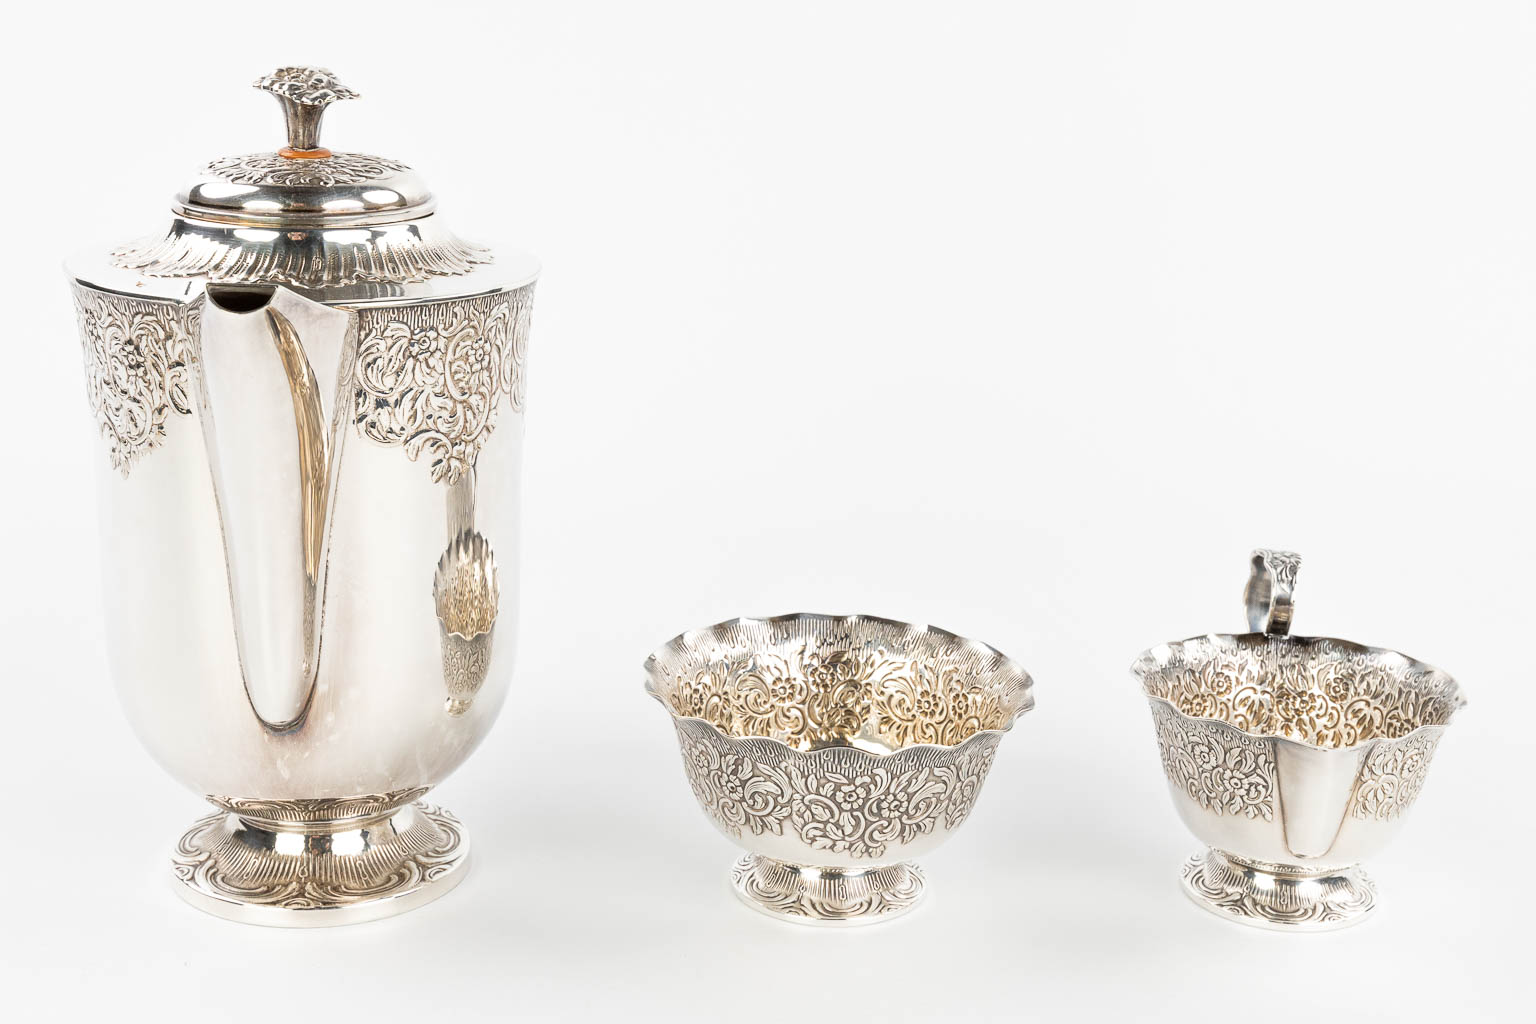 A silver-plated coffee service on a platter with sugar pot, coffee pot and milk jug. (H:22cm)